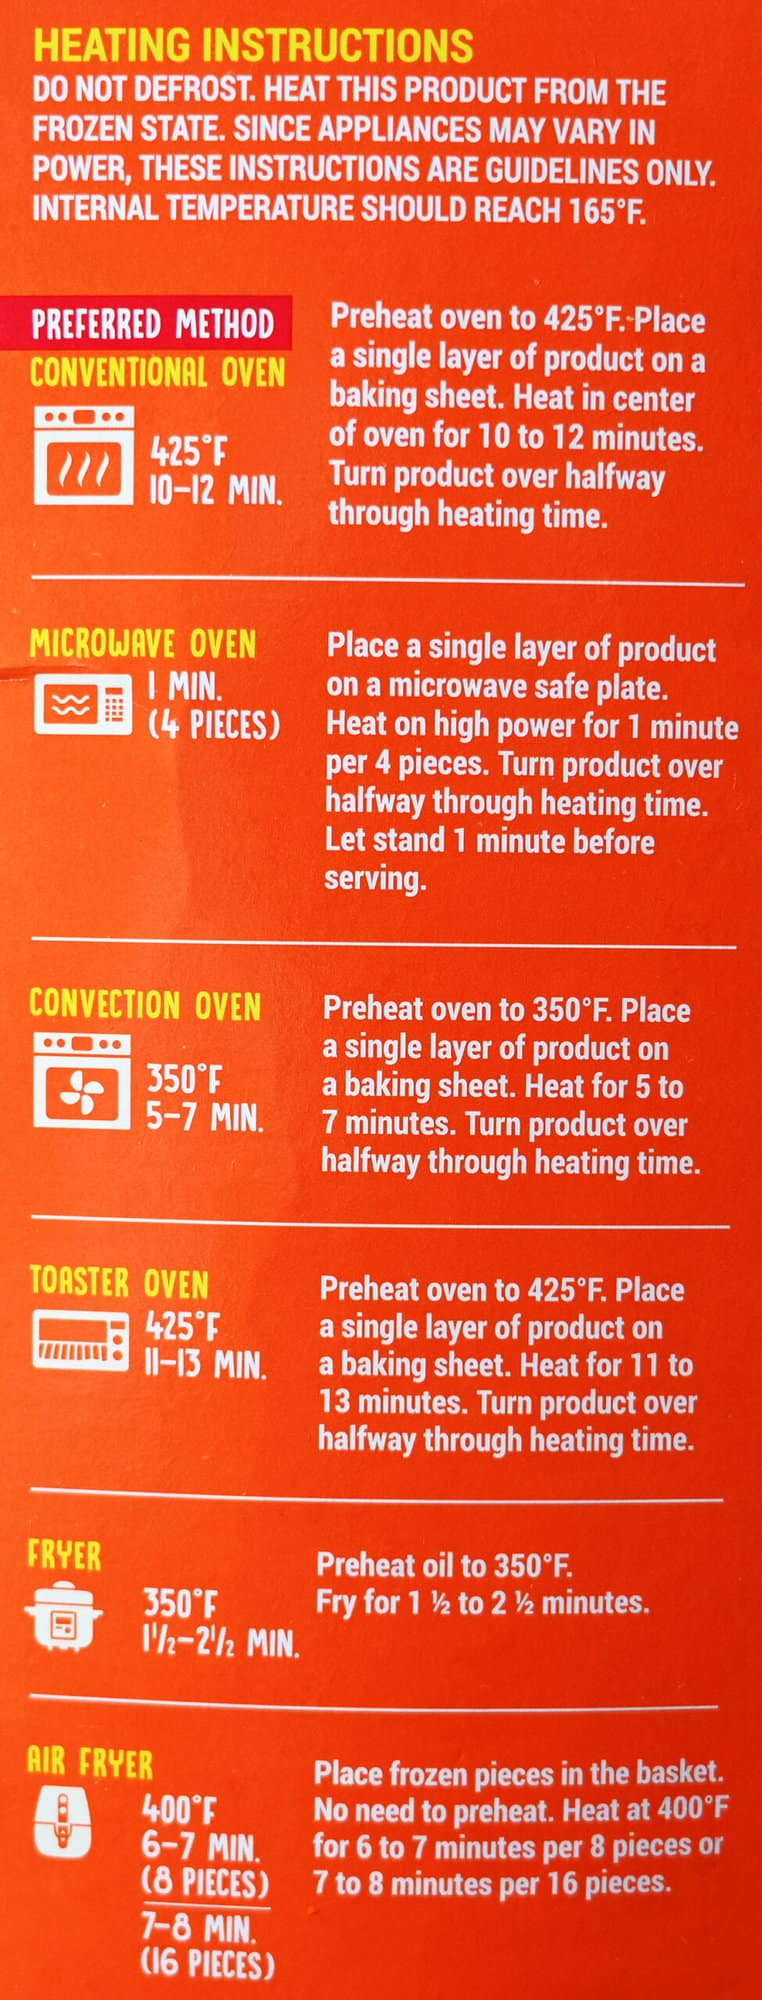 Image of the heating instructions for the nuggets from the back of the box.